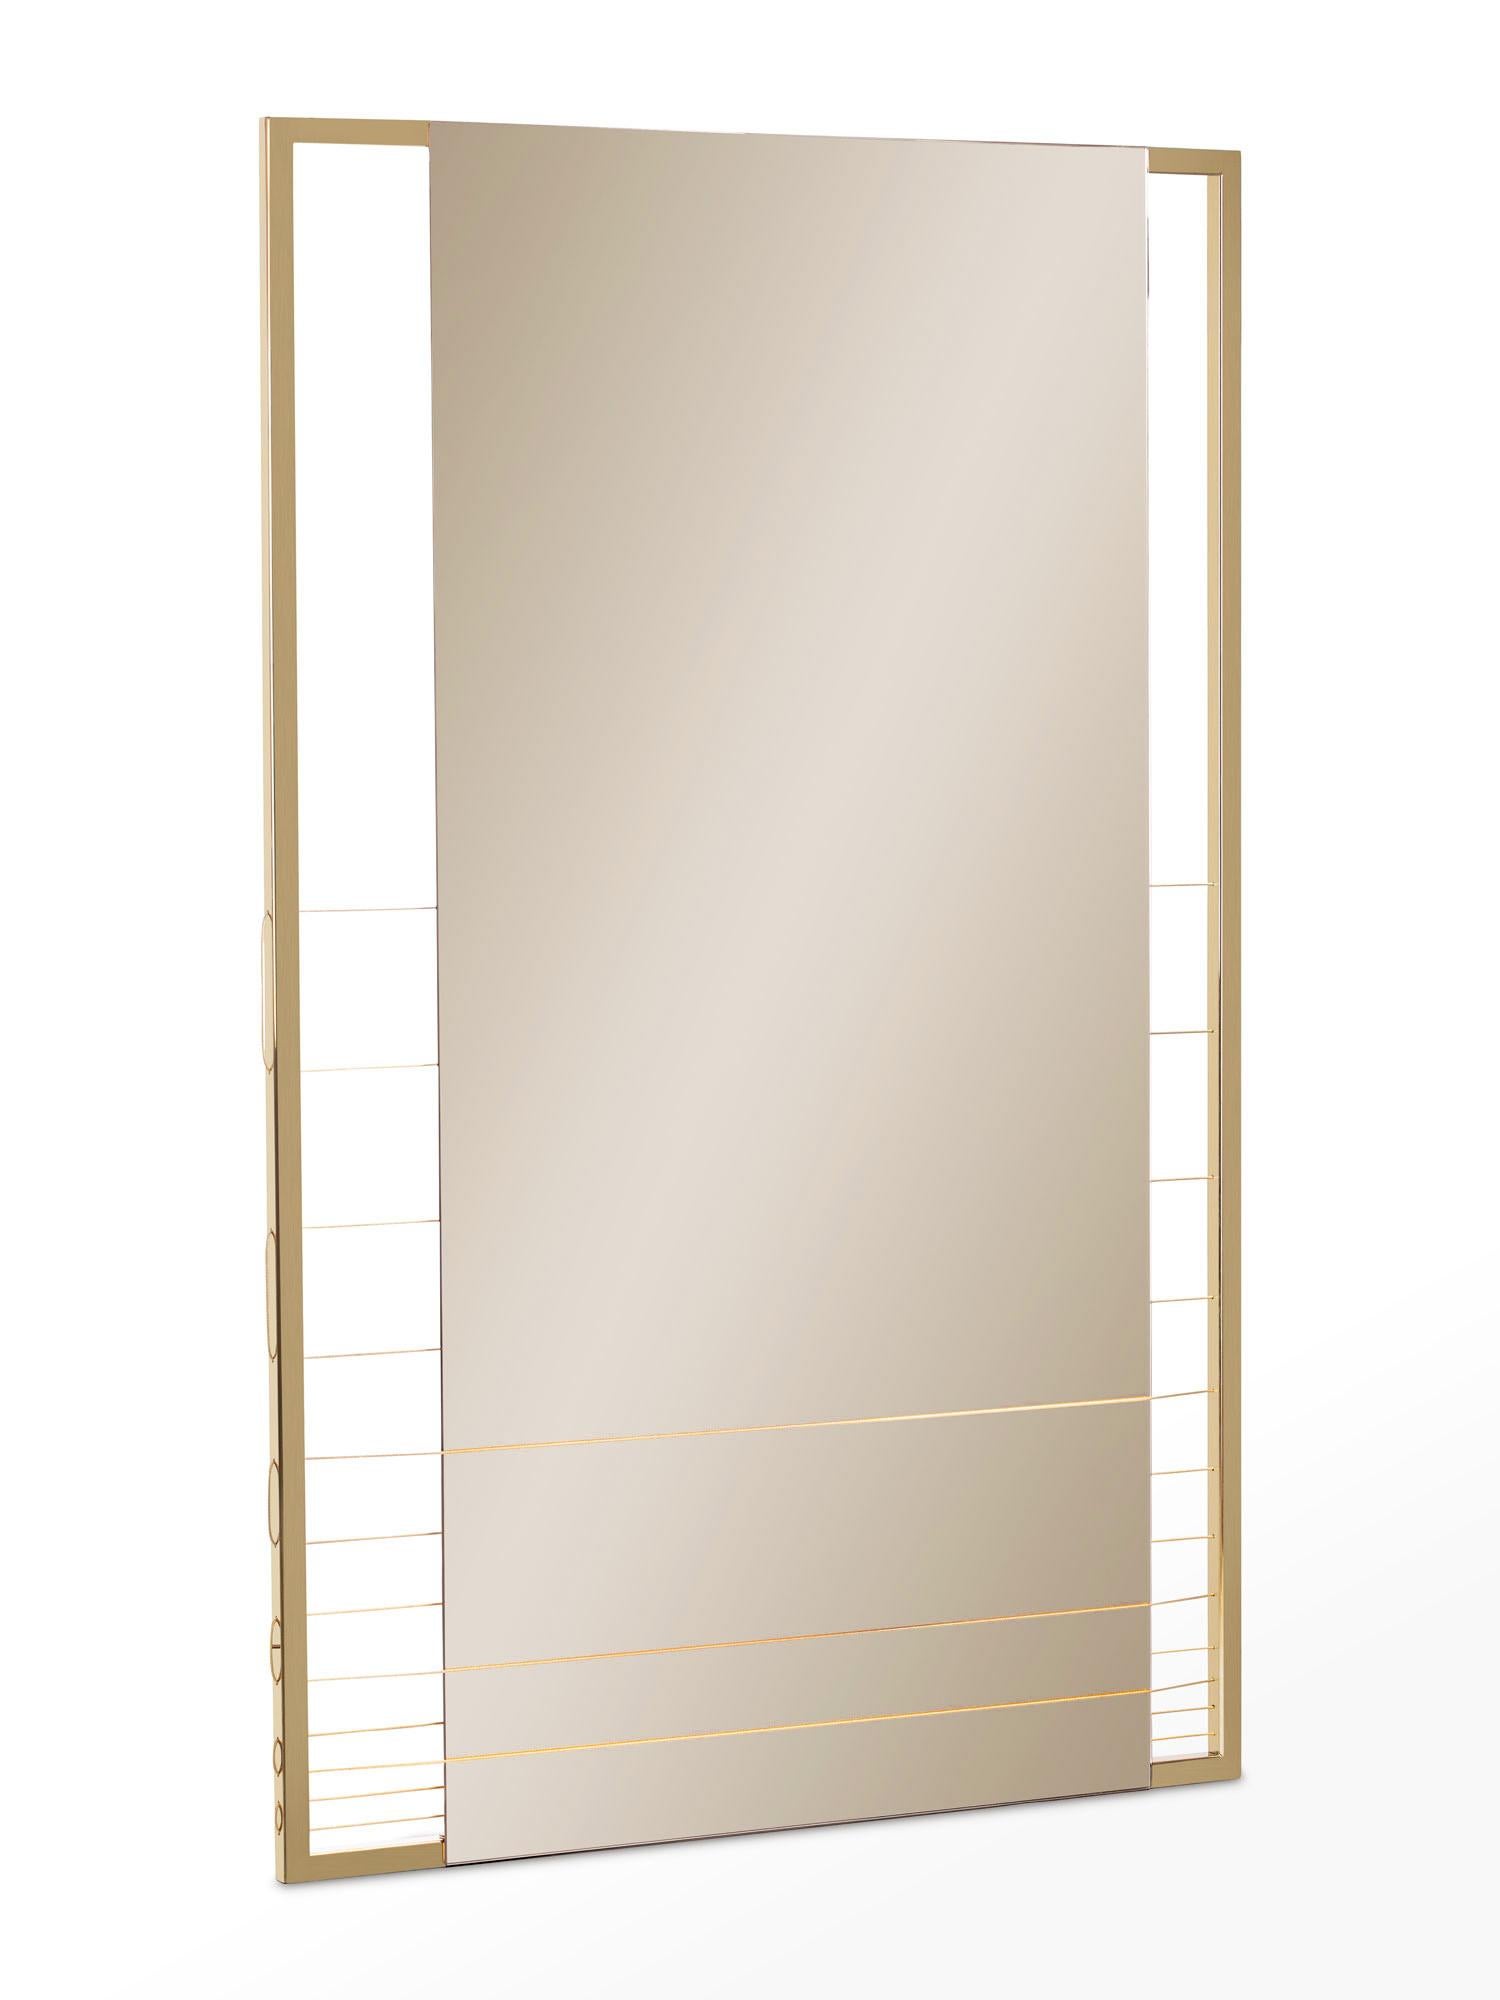 AEGIS-M mirror is made to order using gold finish stainless steel frame, tinted mirror and gold steel wire. The mirror can be hung vertically or horizontally. A modern contemporary design using only the finest materials and manufacturing methods.